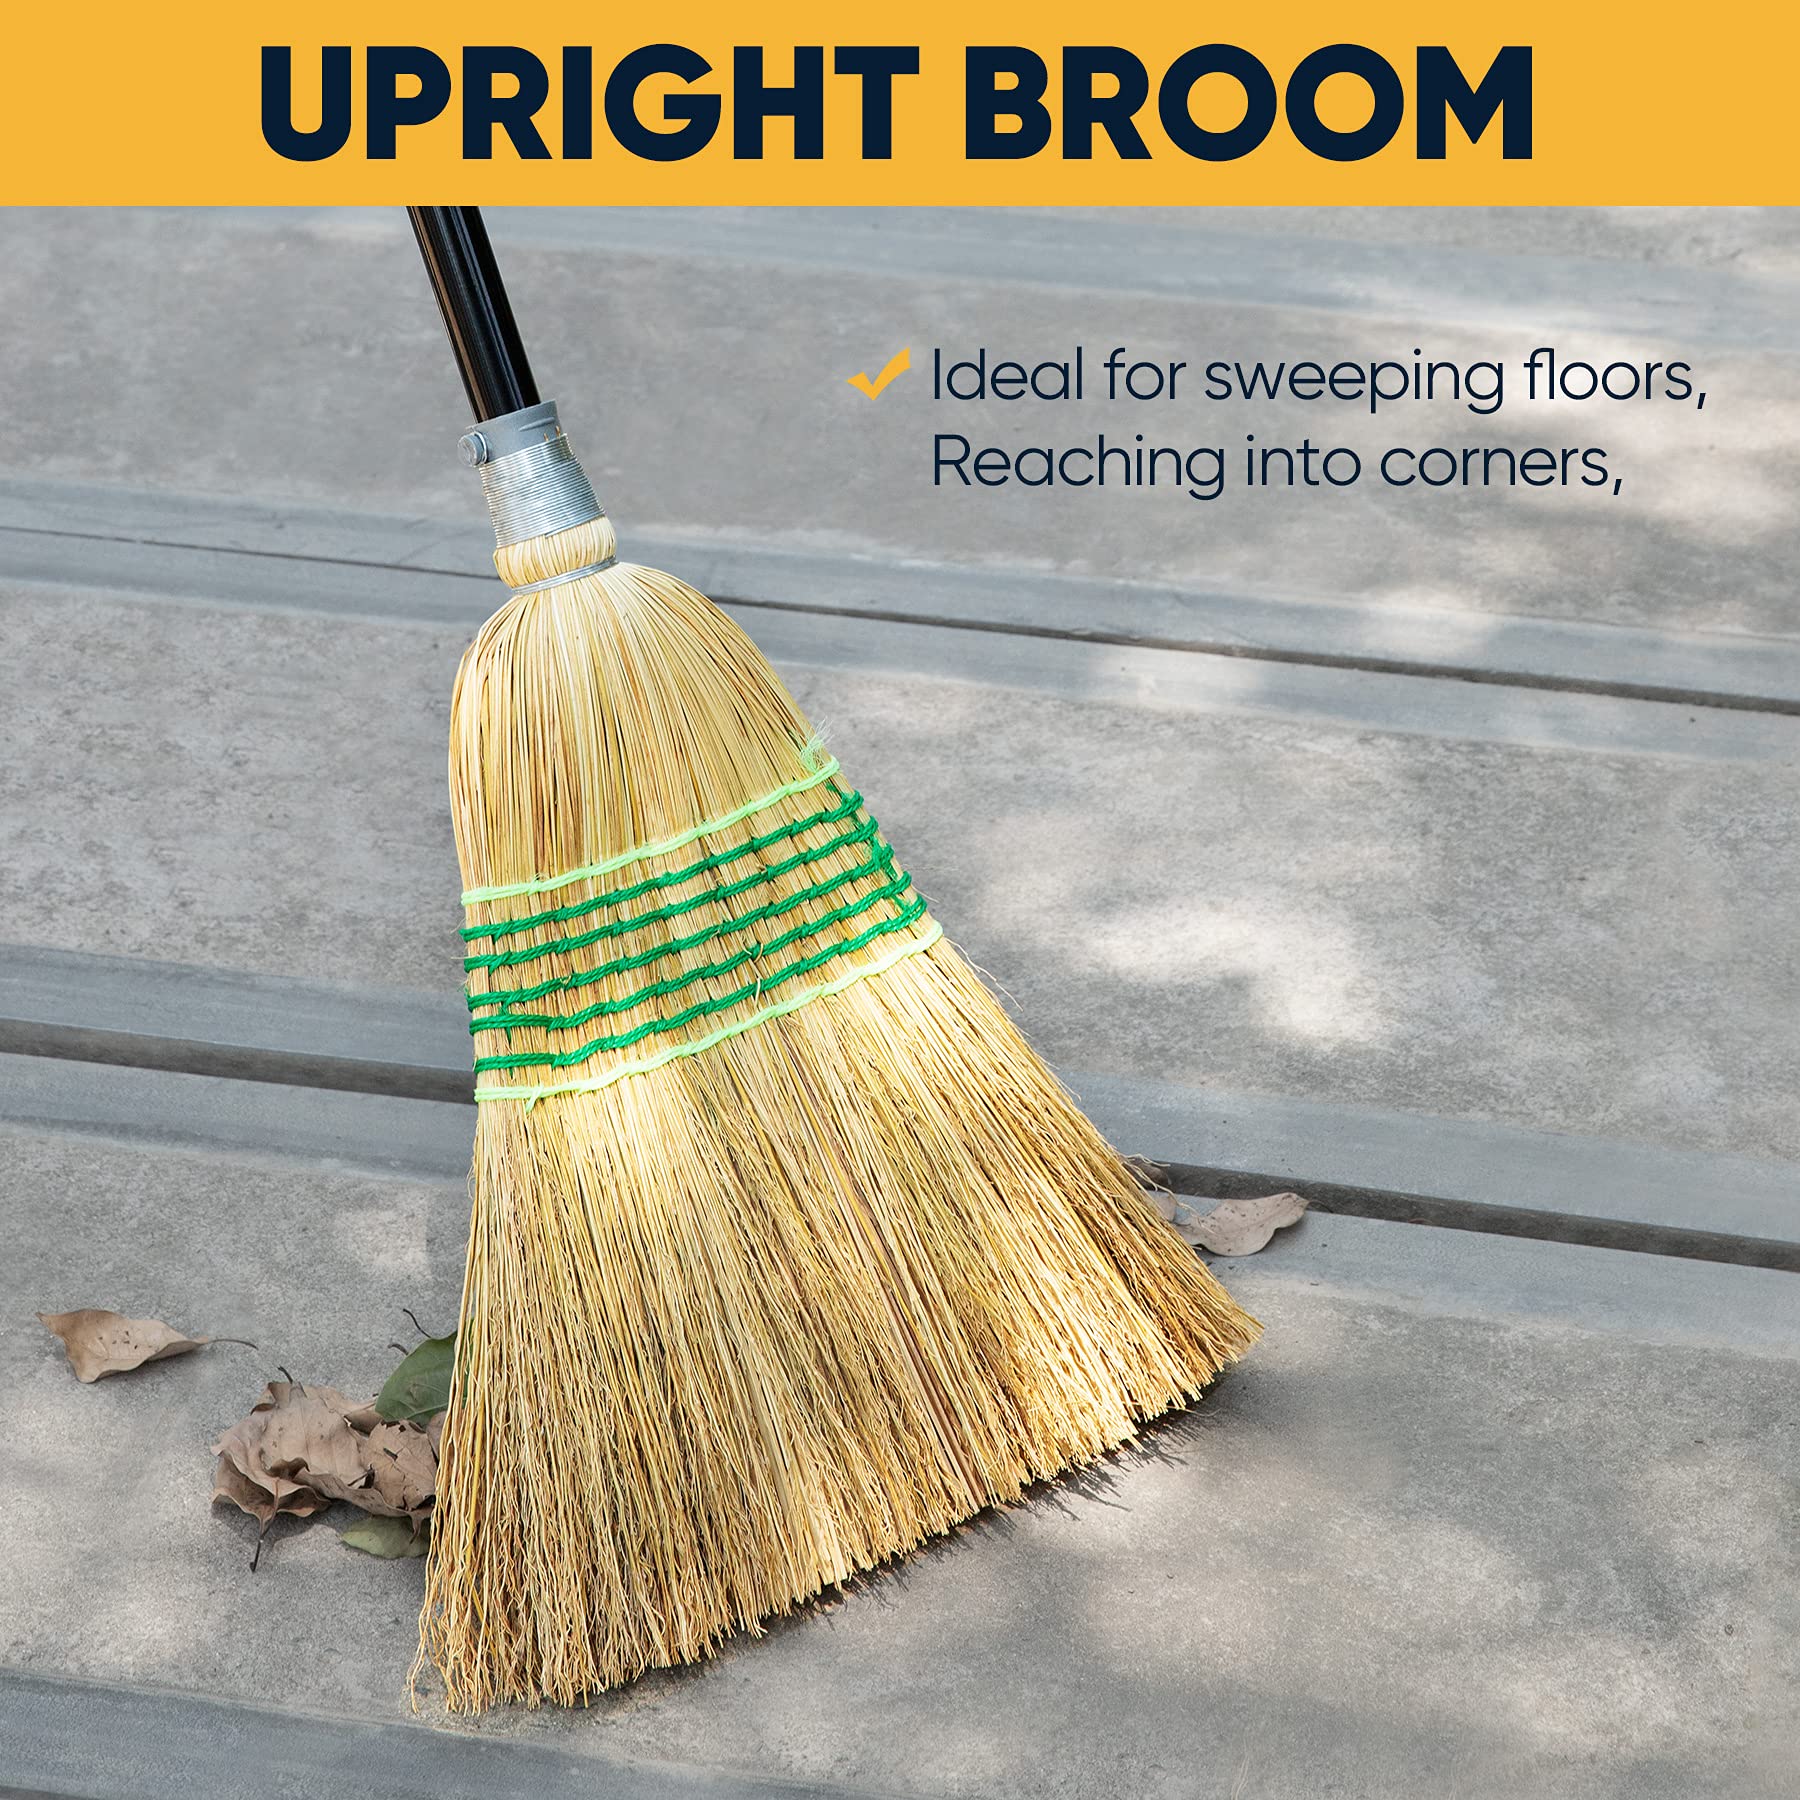 Yocada Heavy-Duty Broom Corn Broom Outdoor Commercial Indoor Perfect for Courtyard Garage Lobby Mall Market Floor Home Office Leaves Stone Dust Rubbish 59.8"